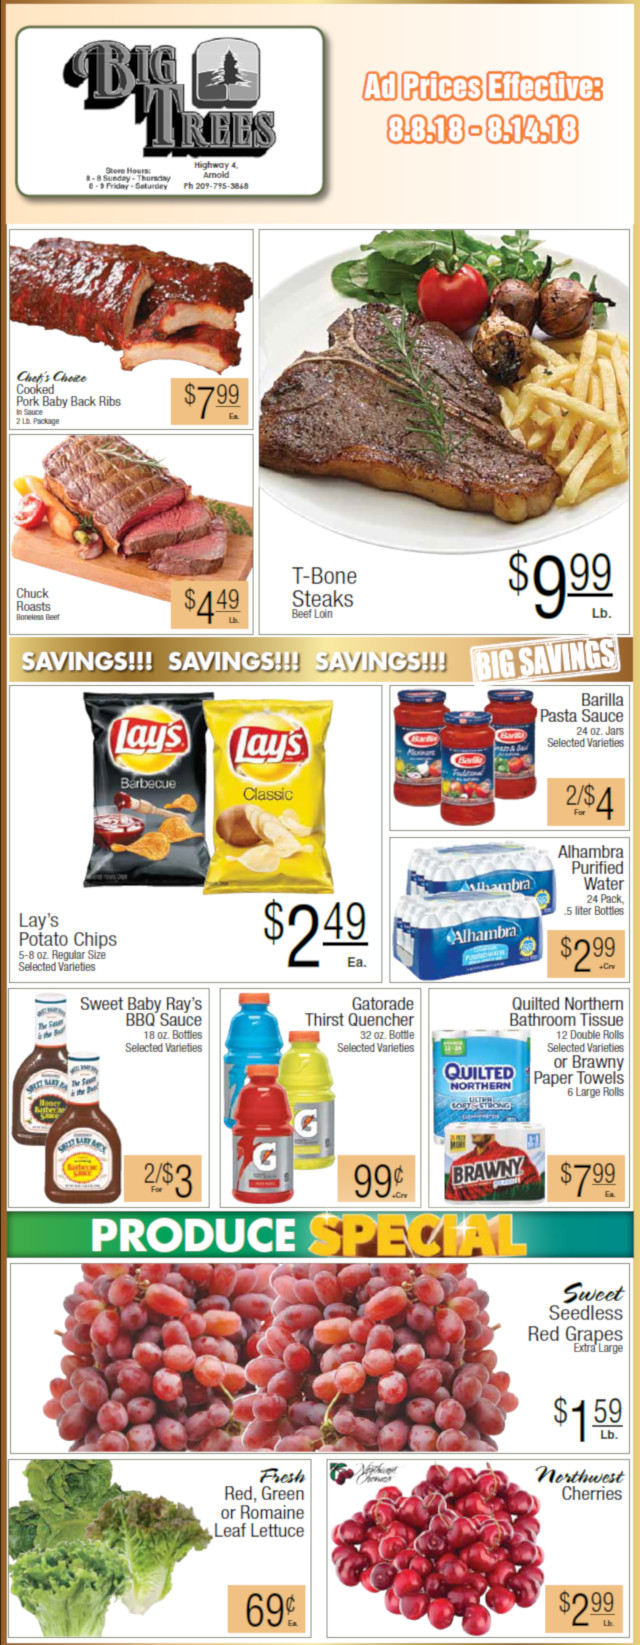 Big Trees Market Weekly Ad & Grocery Specials Through August 14th